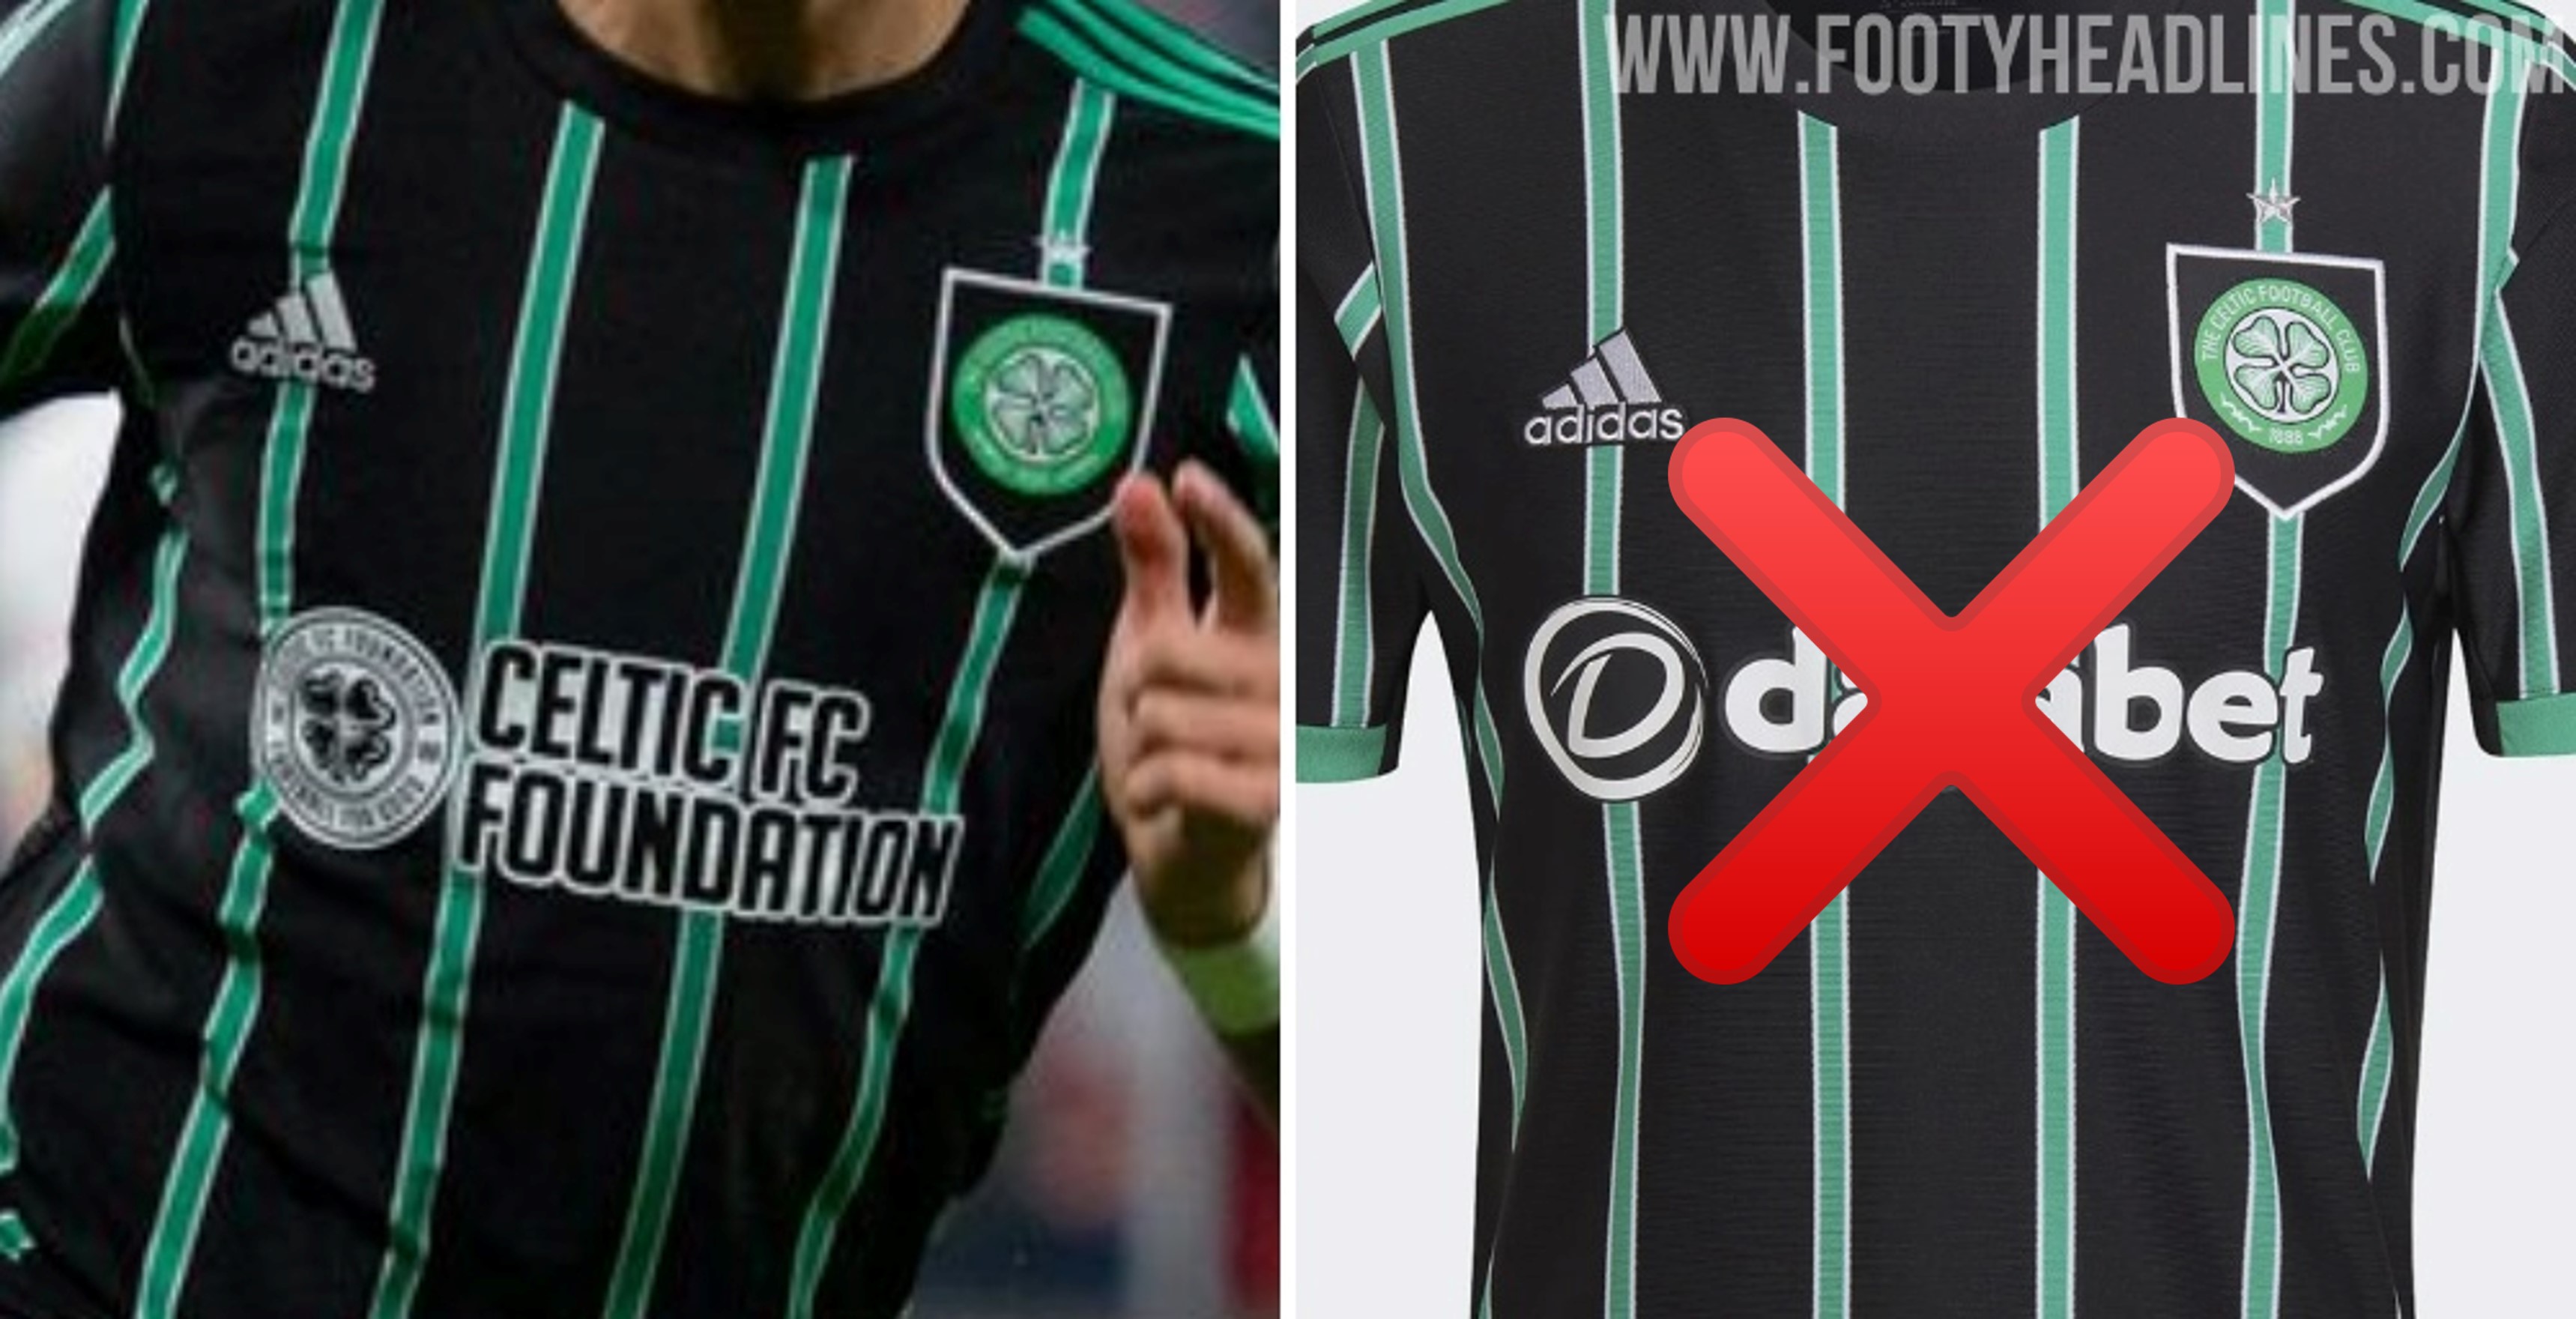 Foundation logo on Celtic shirts for away Champions League ties